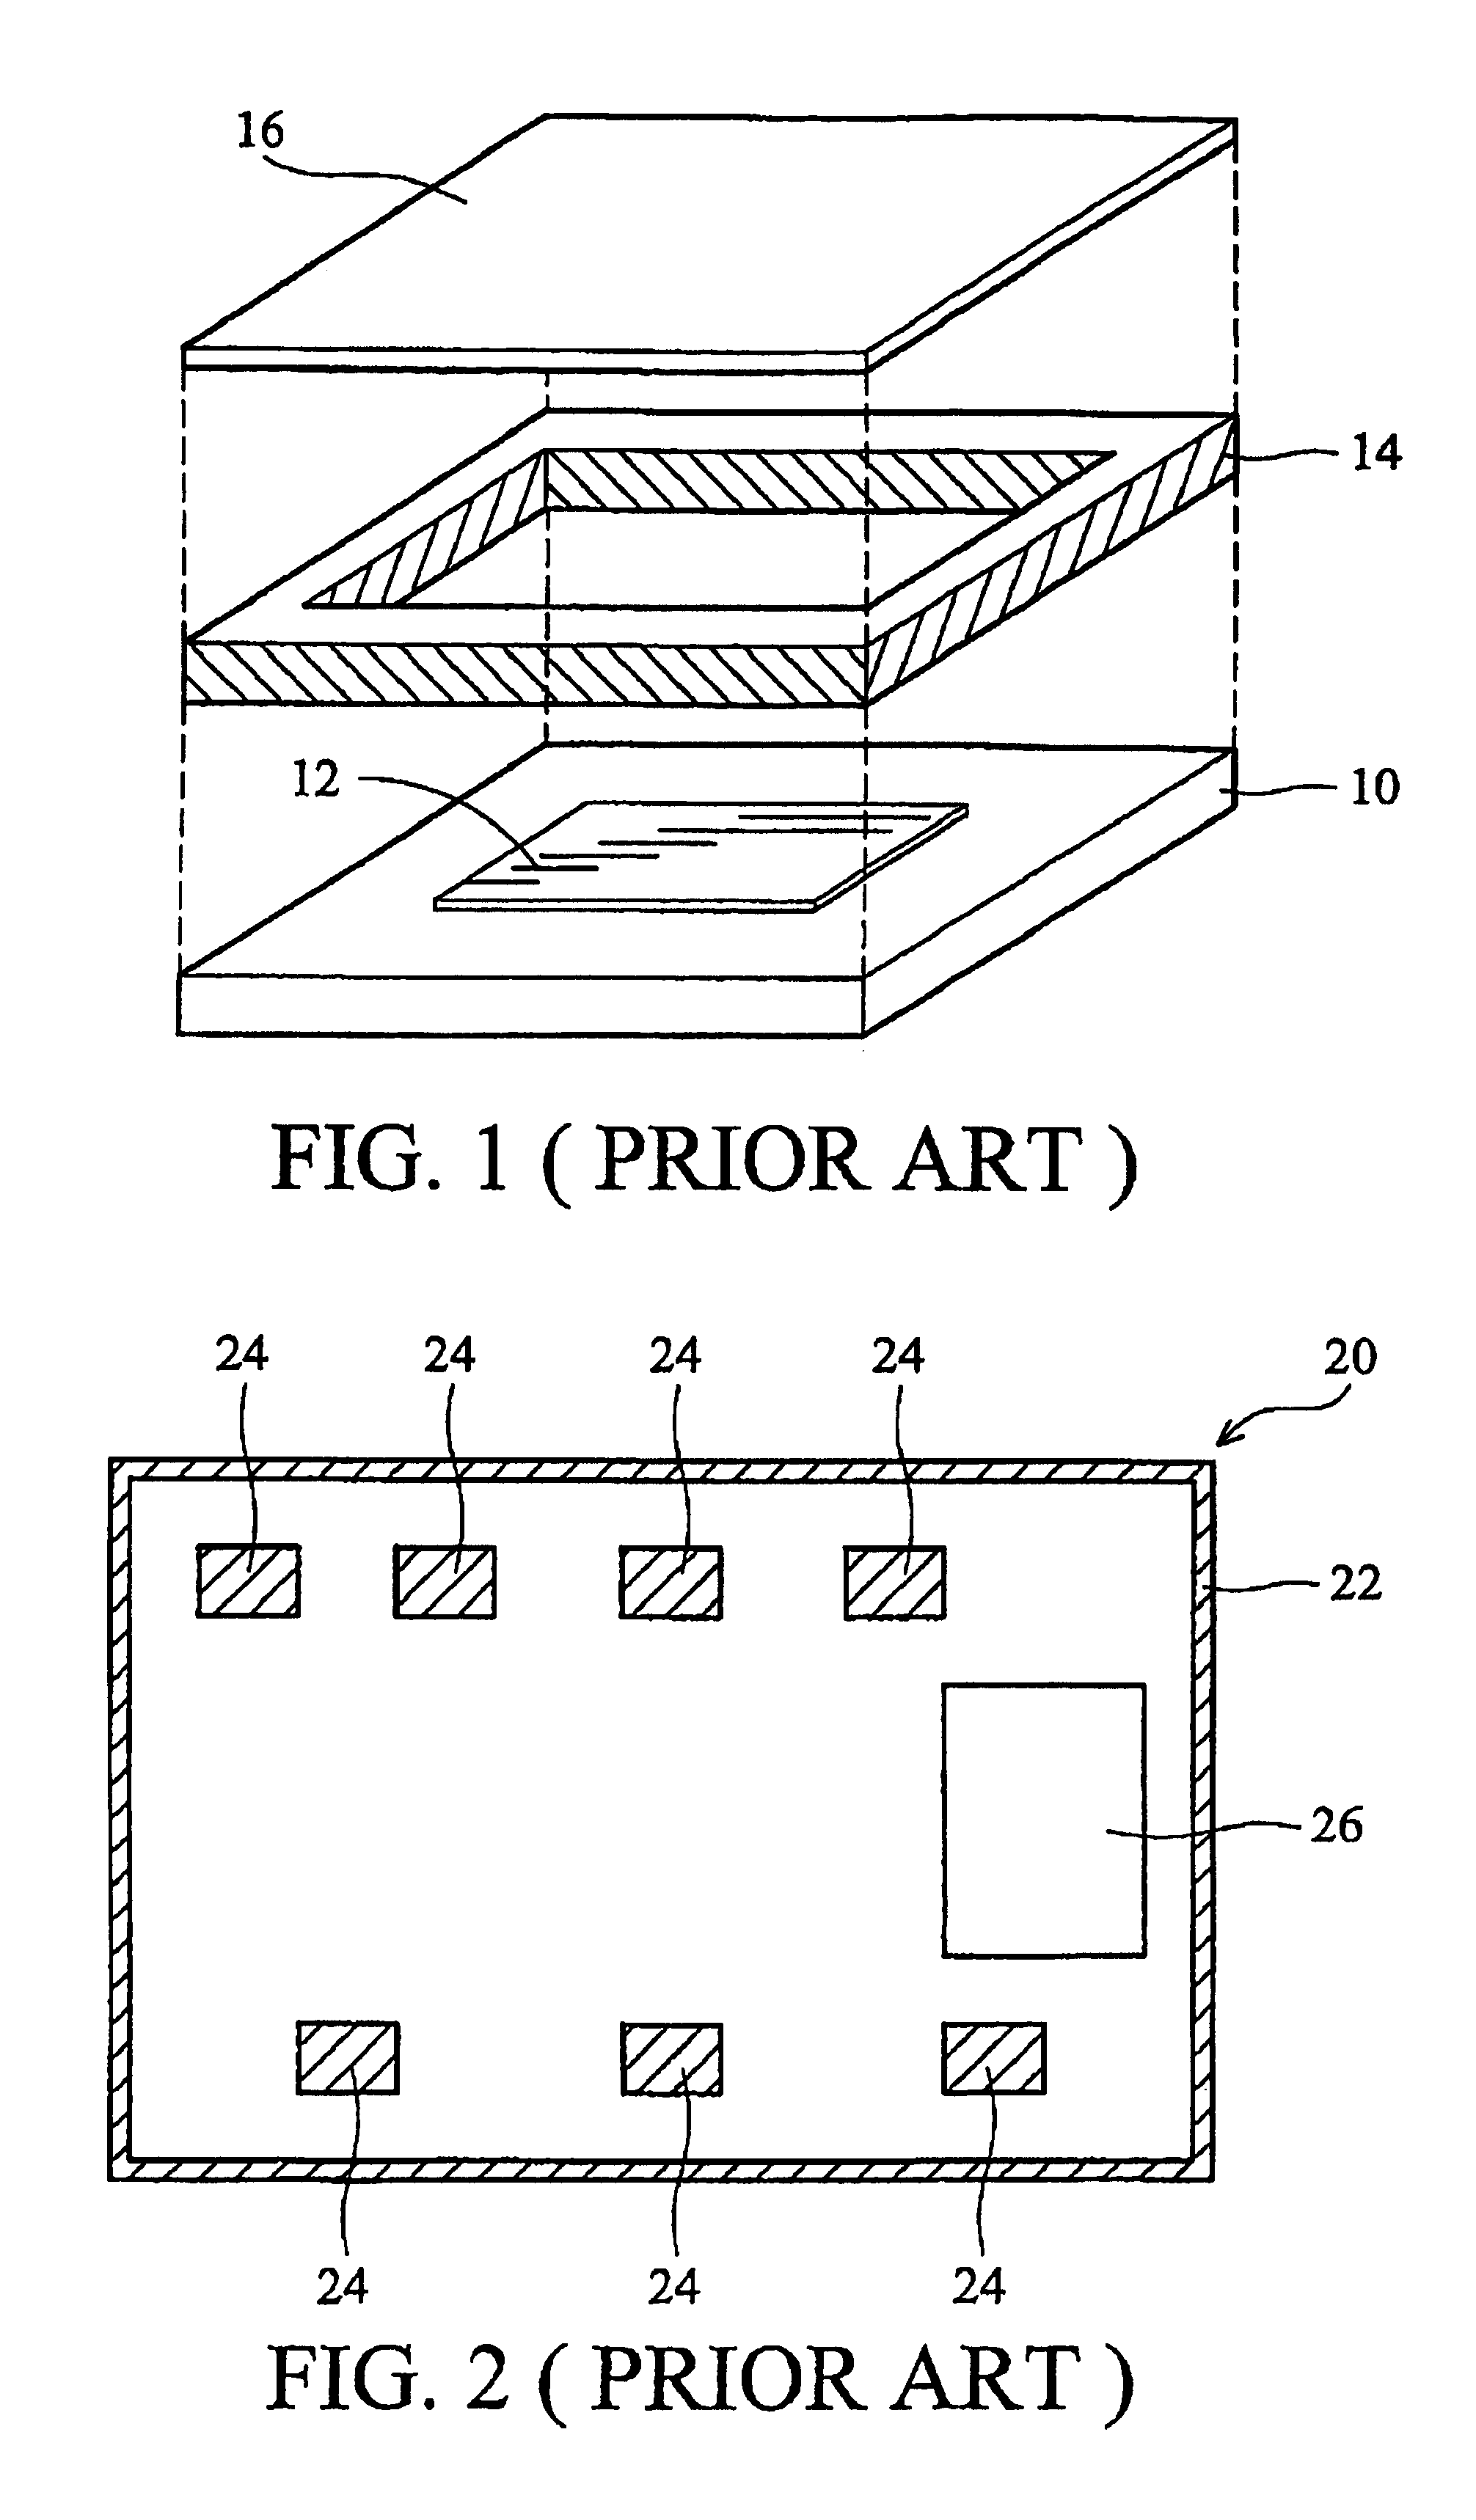 Seal ring structure for radio frequency integrated circuits